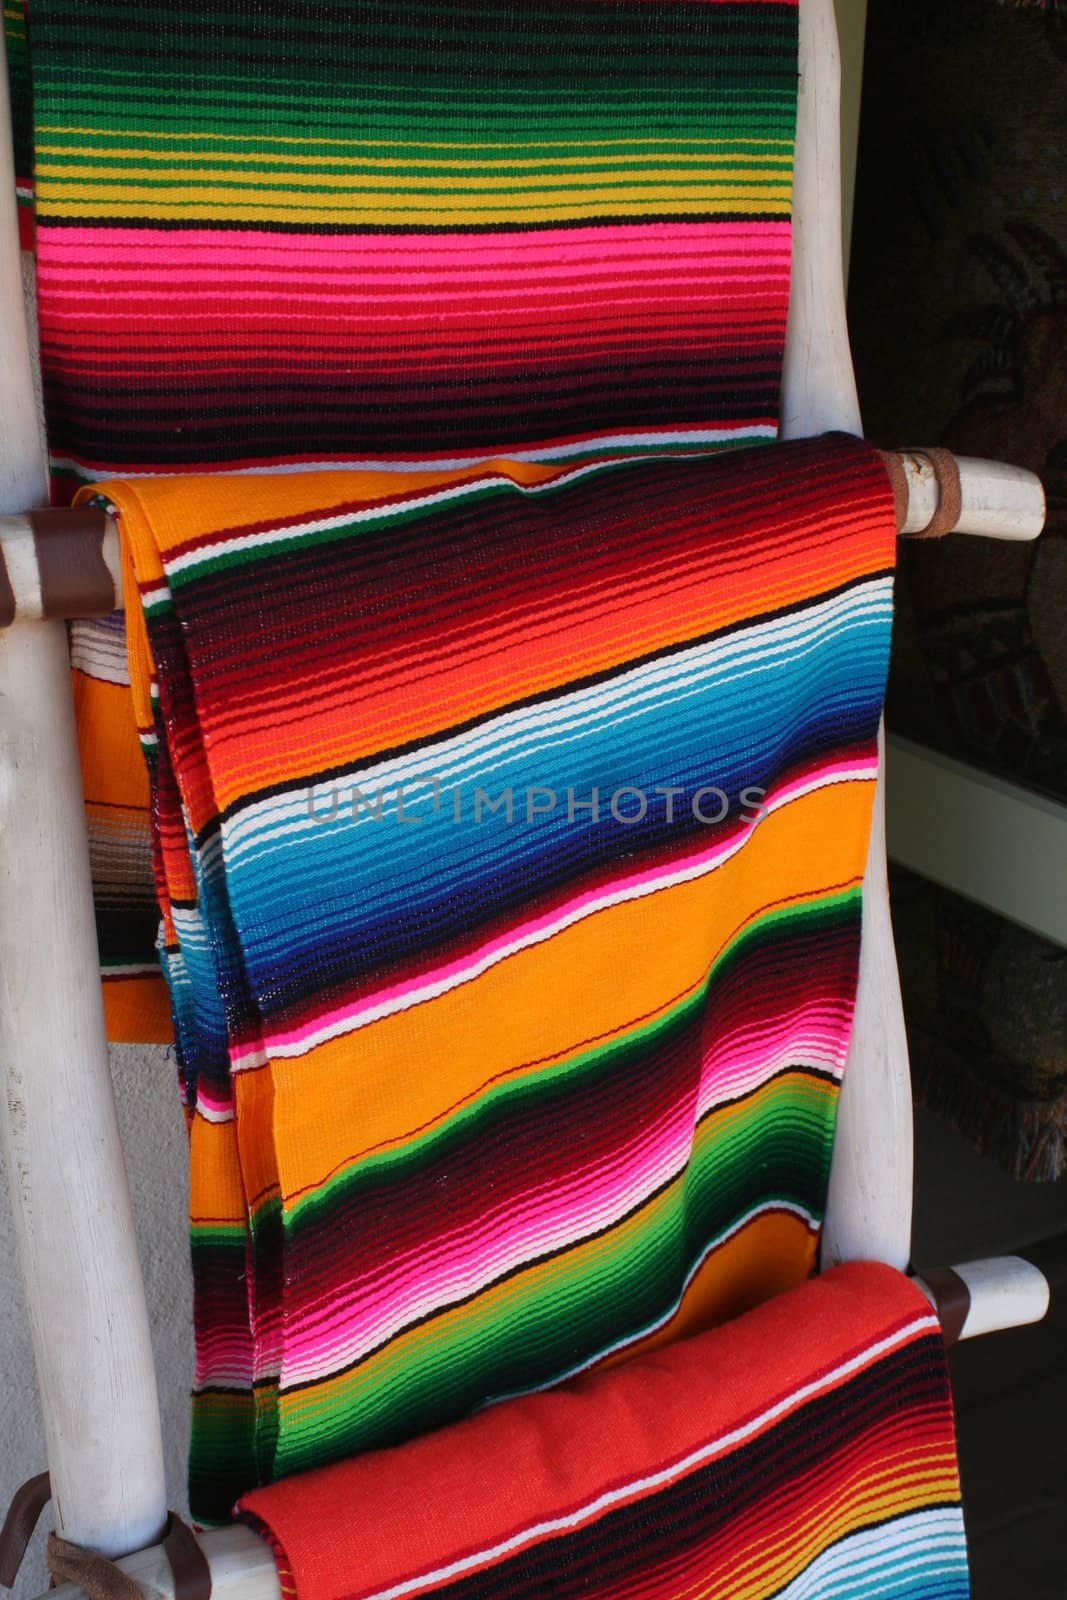 Several colorful Mexican wool blankets hung on display.